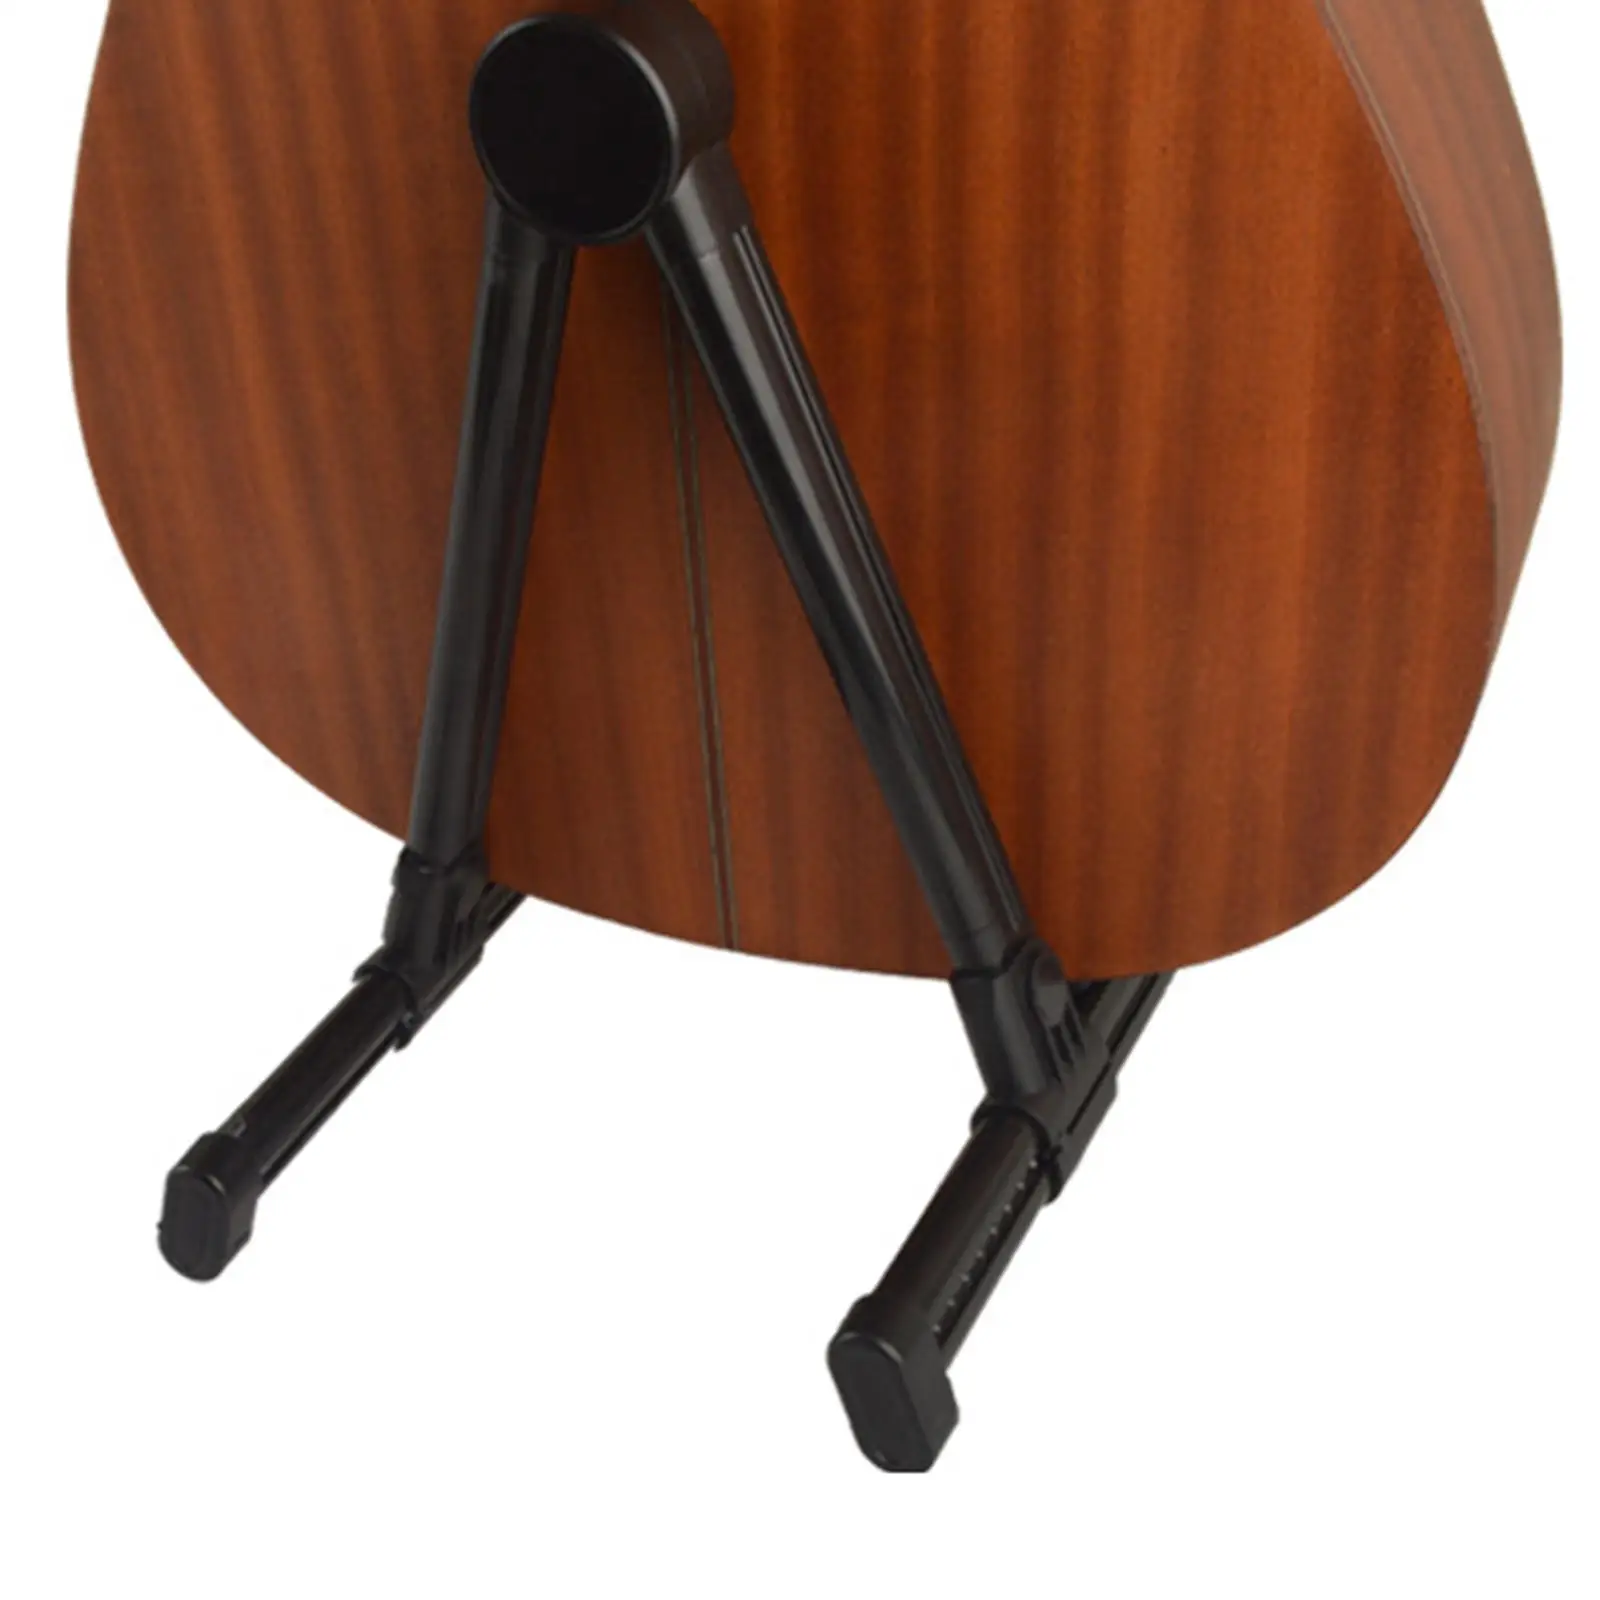 Professional Guitar Stand A Frame Musical Rack Holder for Acoustic Electric Guitar Bass Accessories